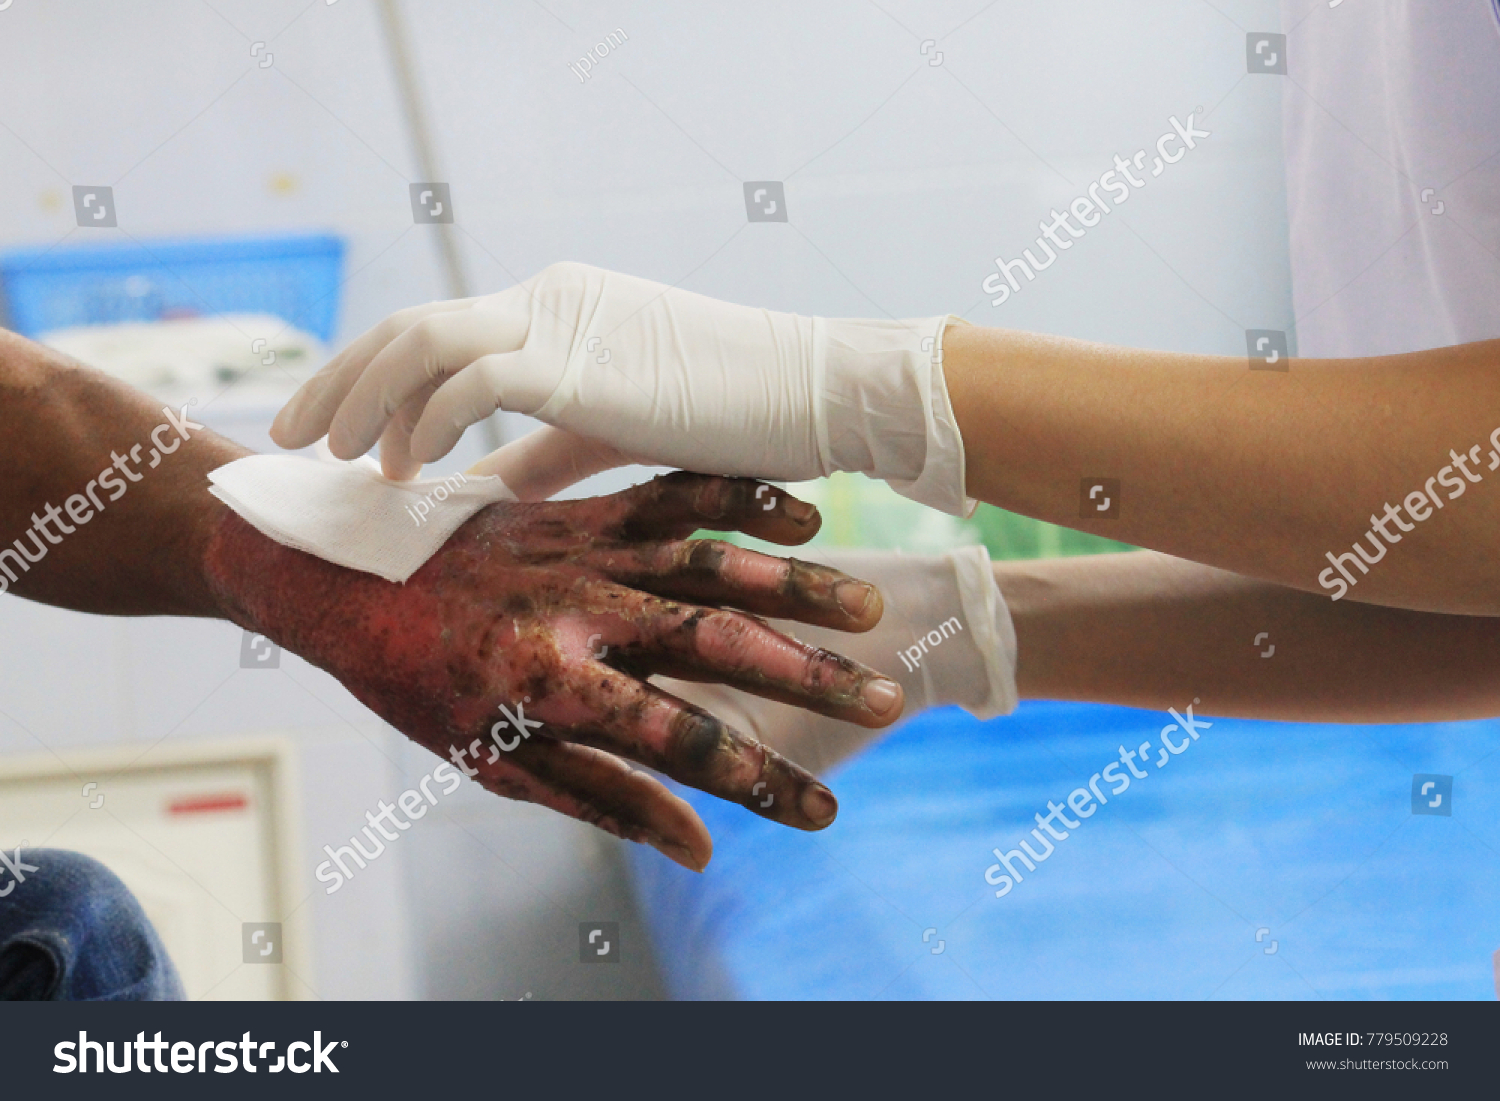 Dressing wound burn of second degree of wrist and hand with blur #779509228